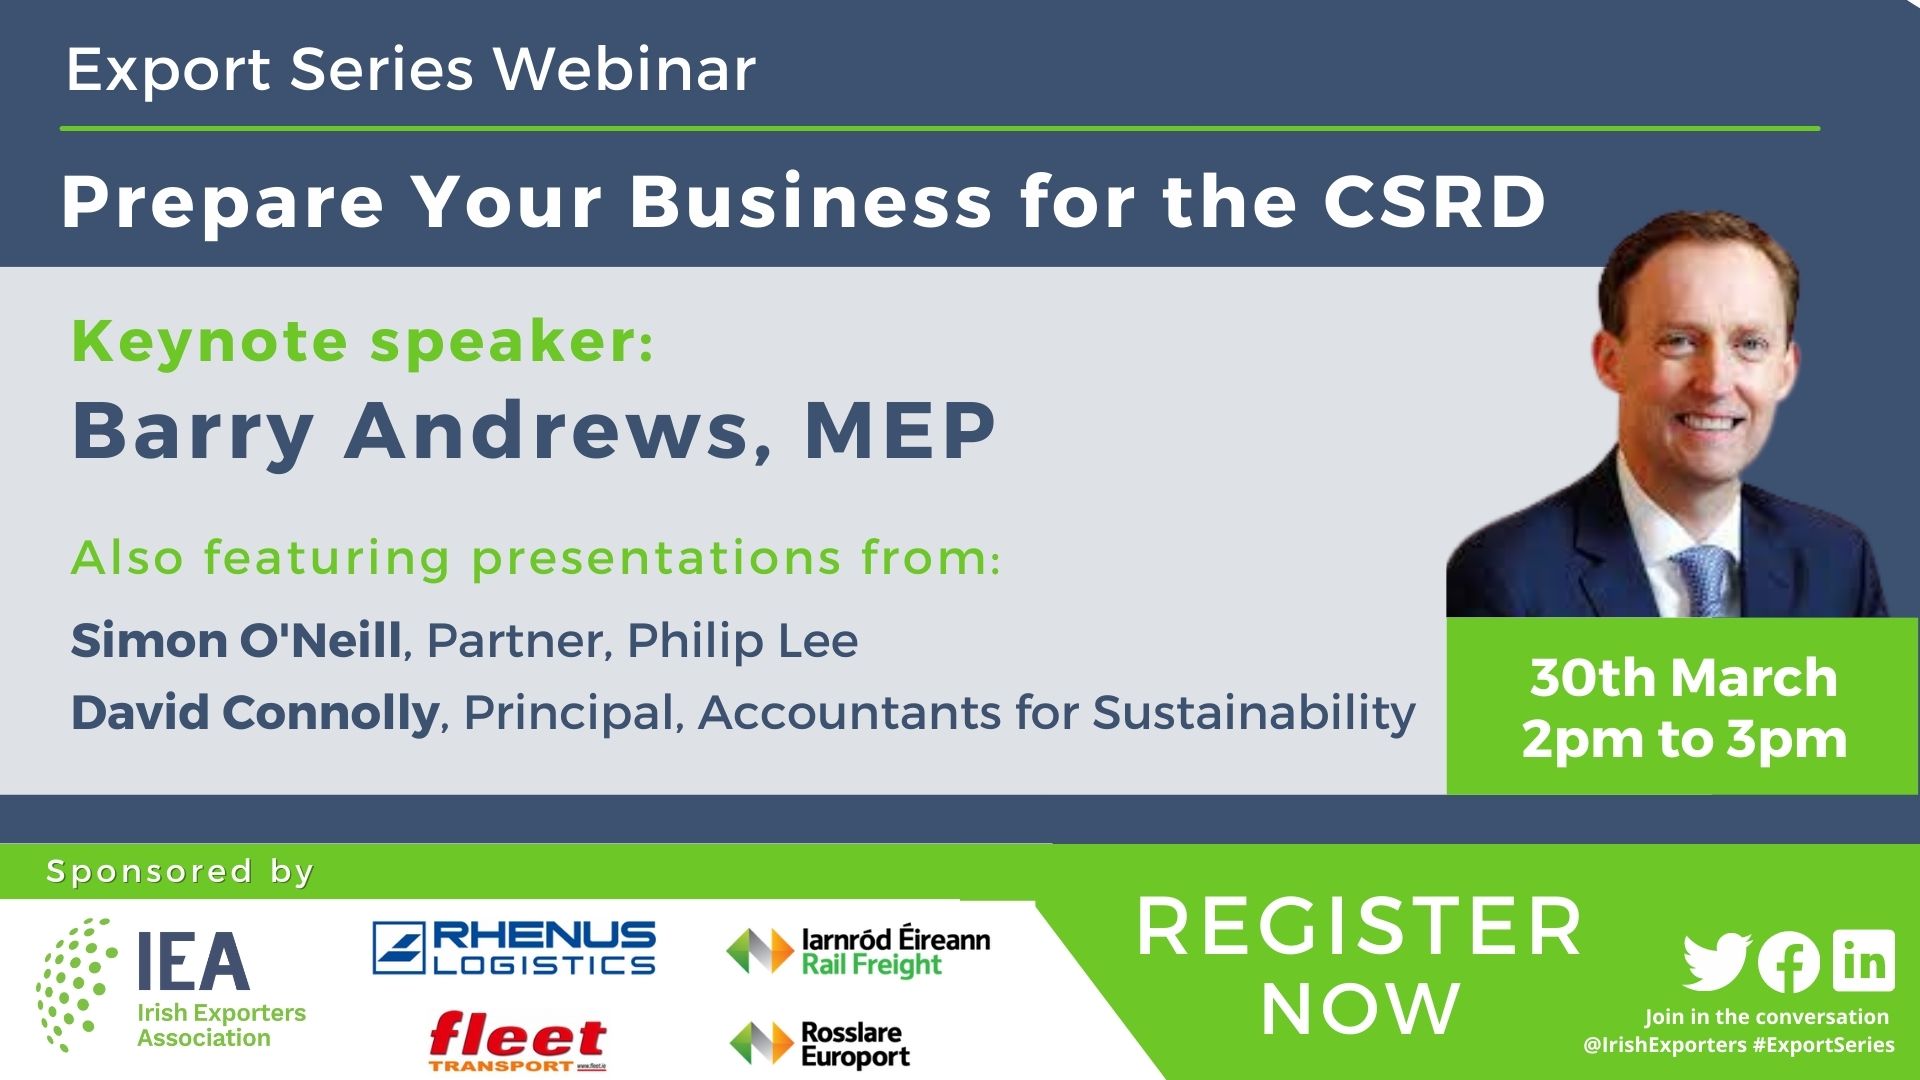 Export Series Webinar: Prepare Your Business for the CSRD